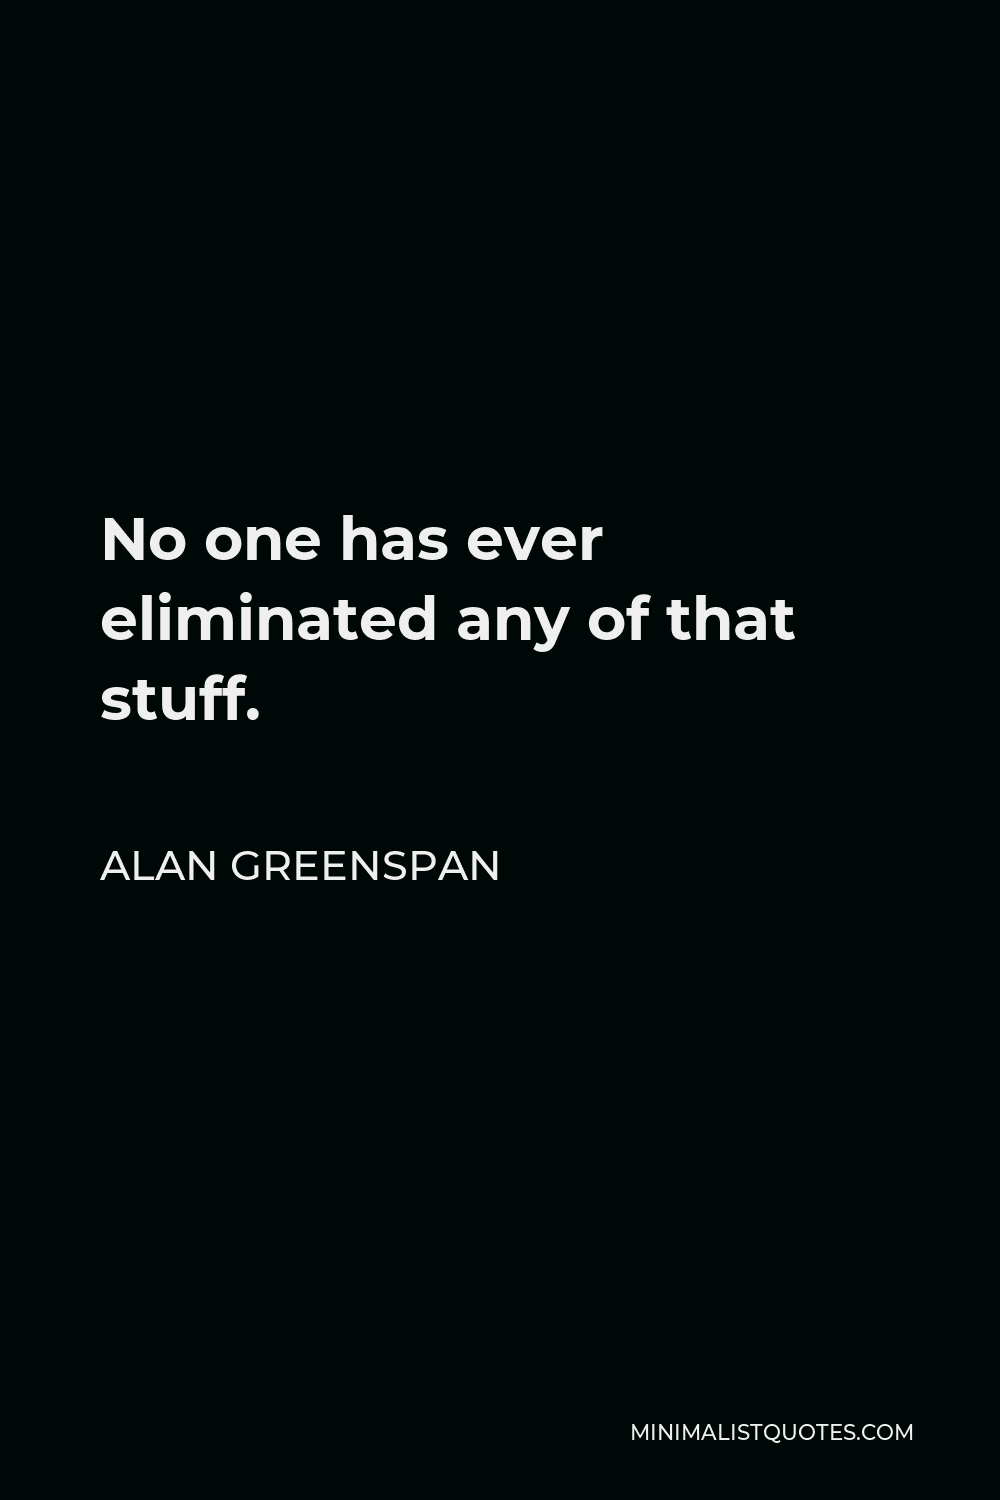 Alan Greenspan Quote - No one has ever eliminated any of that stuff.